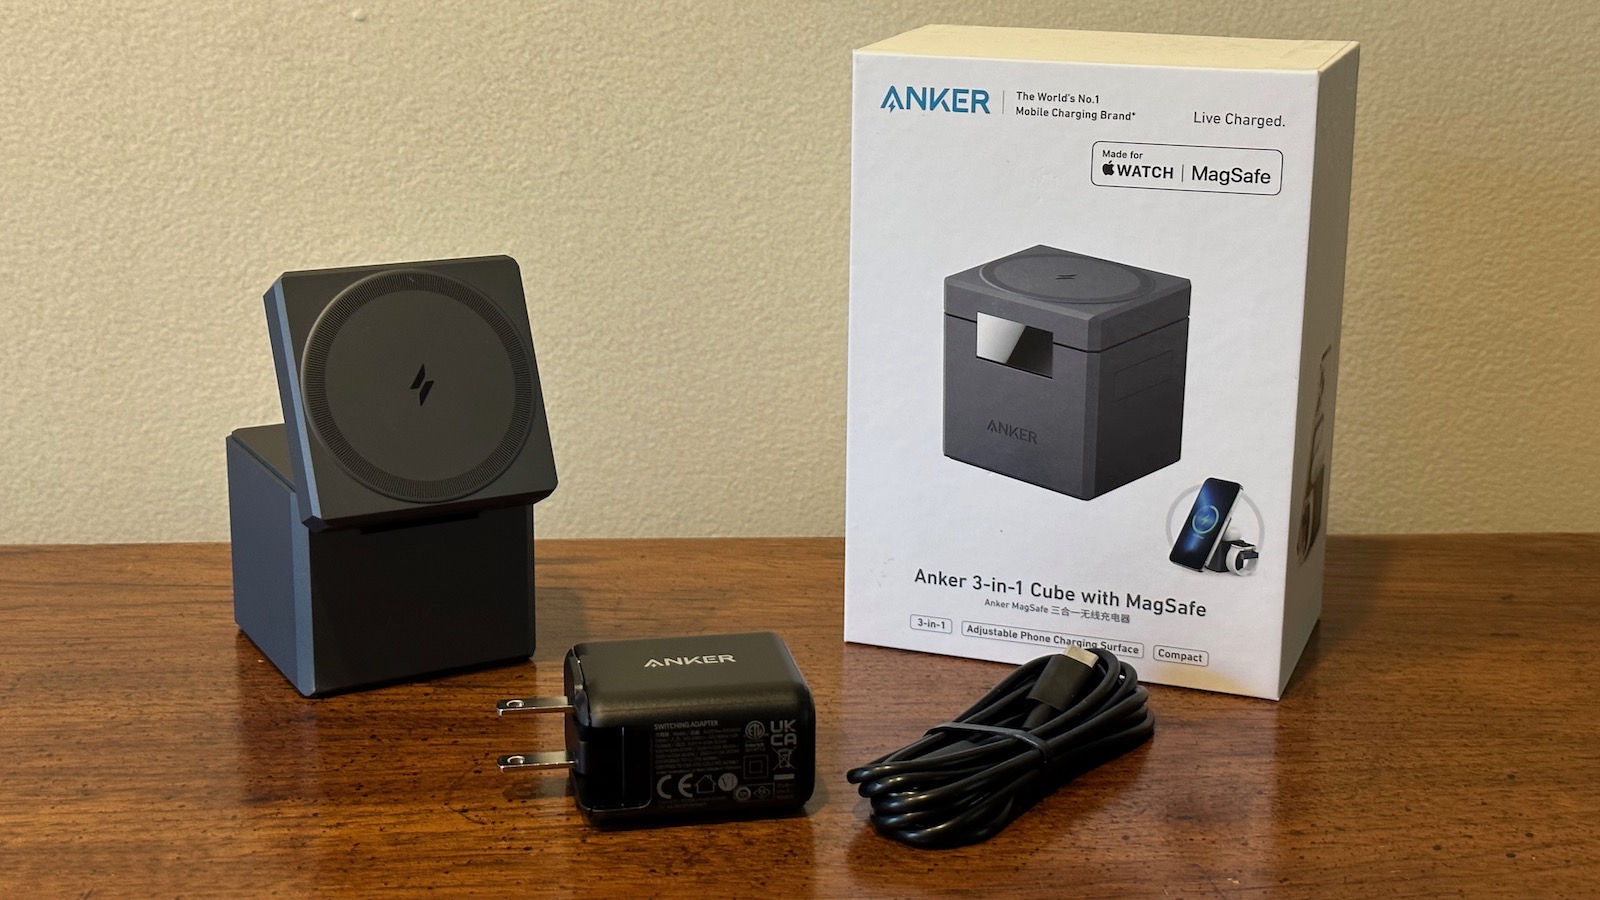 Review: Anker’s 3-in-1 Cube With MagSafe Offers Fast, Versatile Charging in a Unique Design